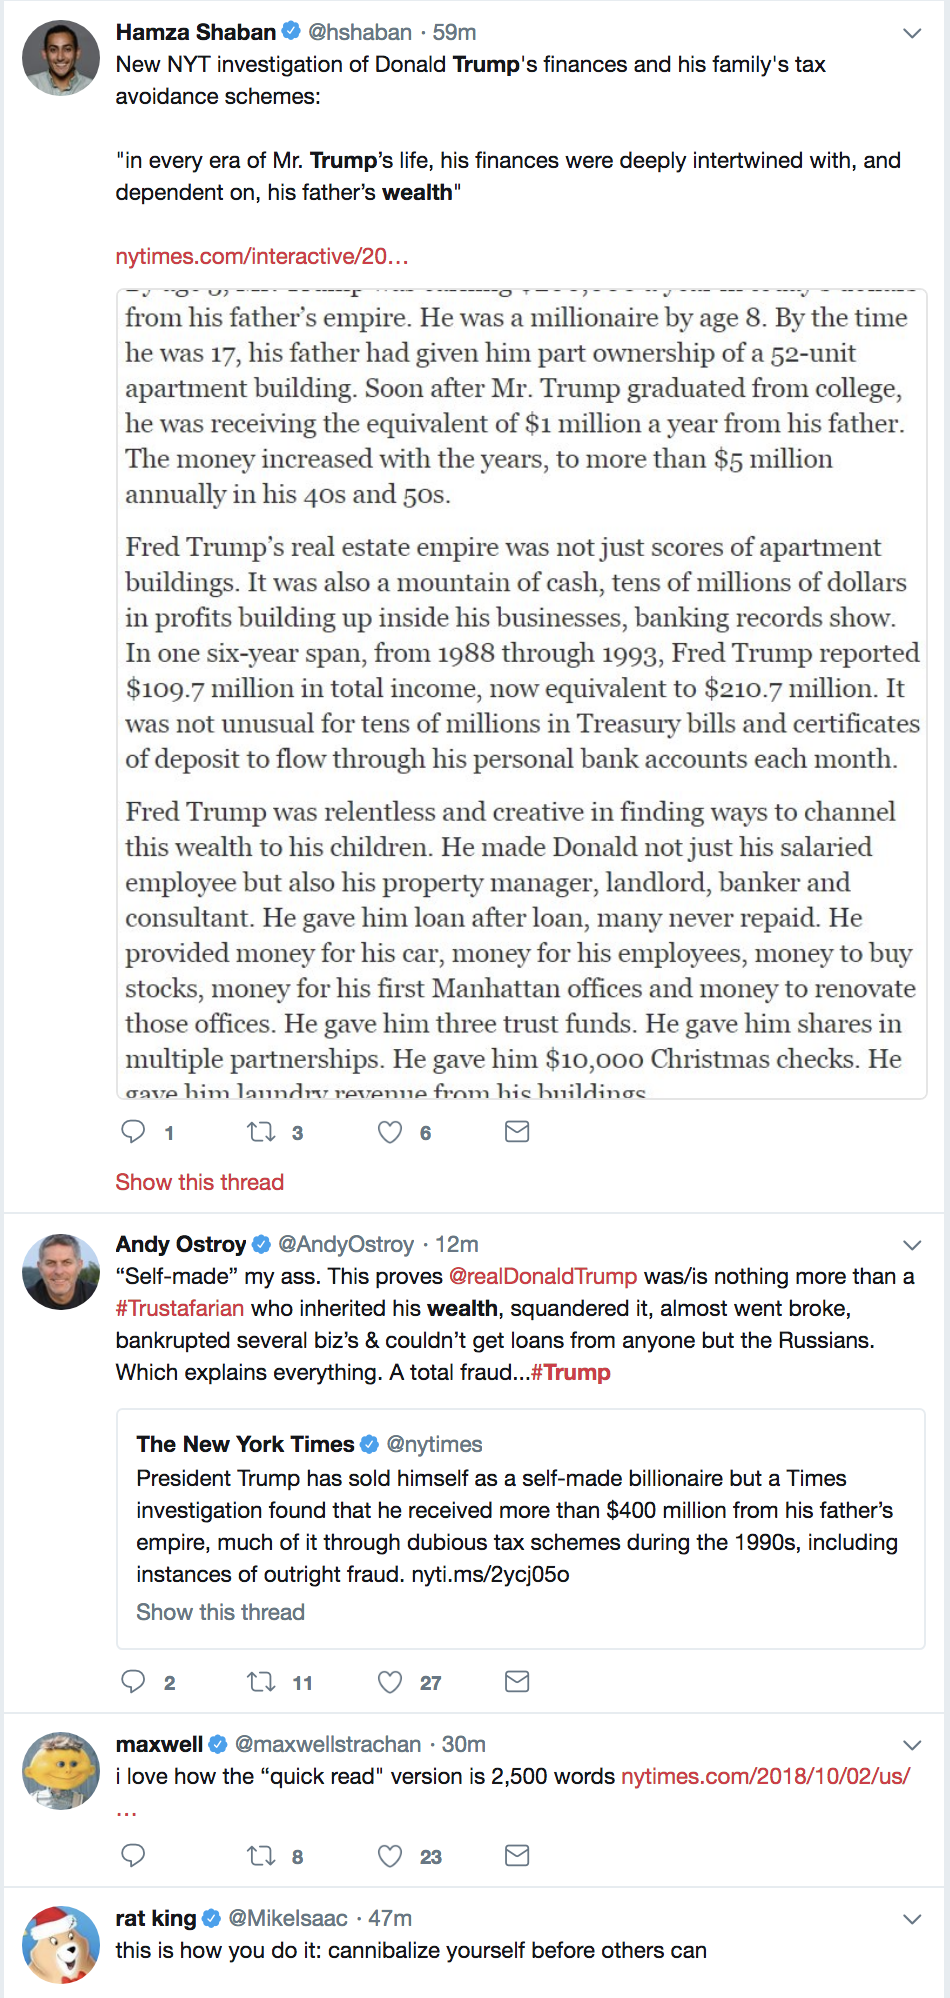 Screen-Shot-2018-10-02-at-3.29.37-PM BREAKING: Massive Trump Tax Evasion Scandal Unveiled By NY Times Uncategorized 